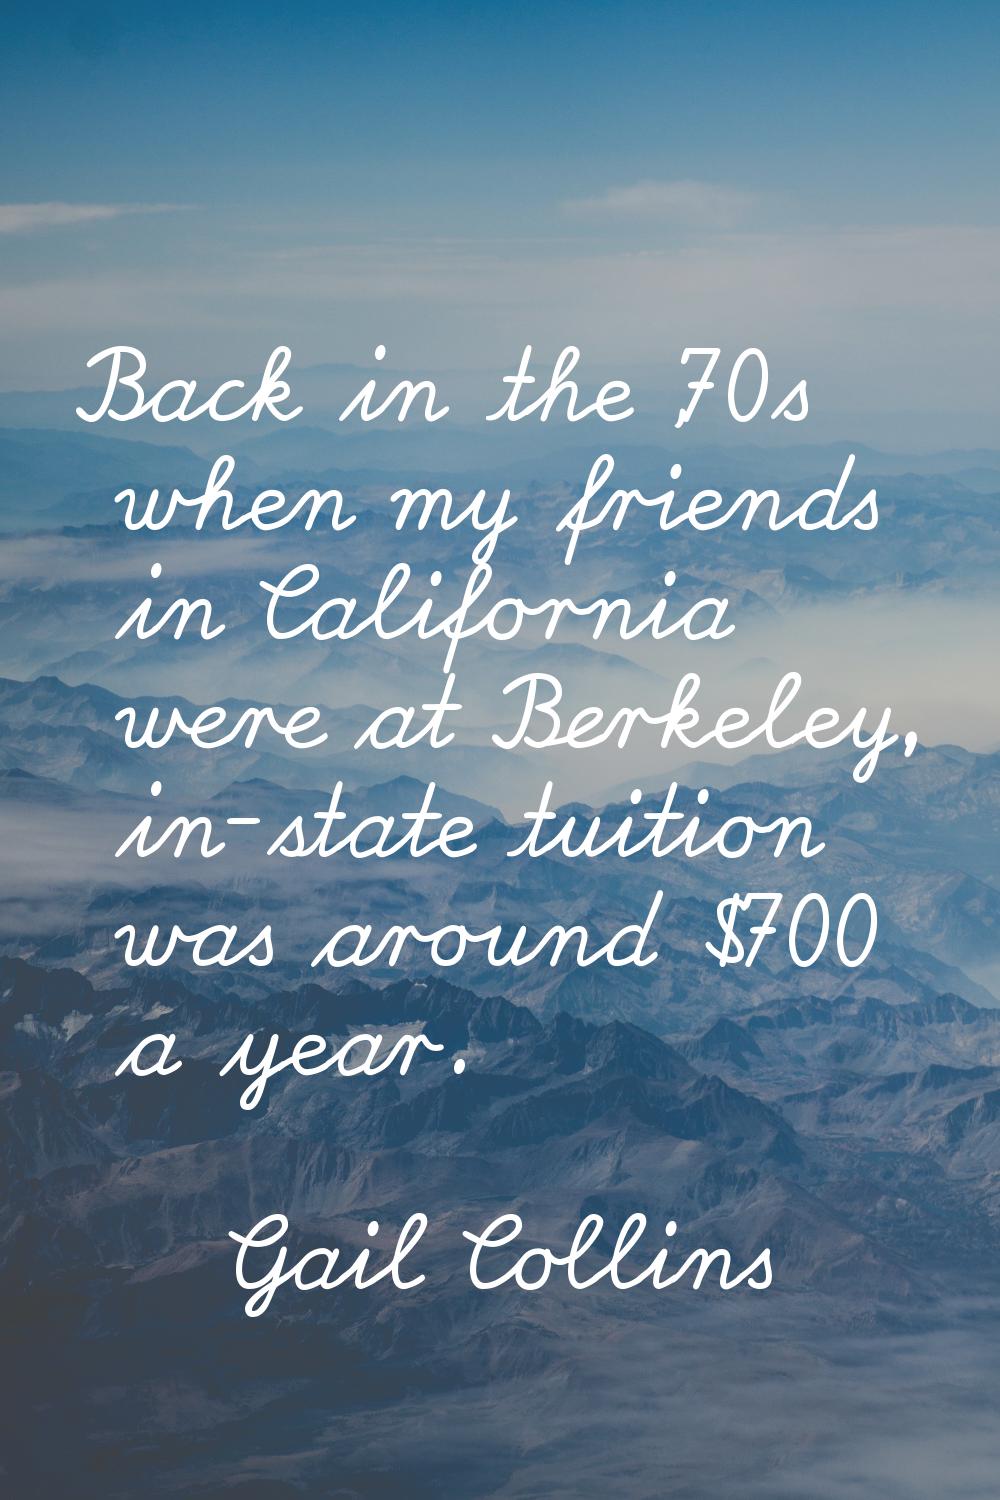 Back in the '70s when my friends in California were at Berkeley, in-state tuition was around $700 a